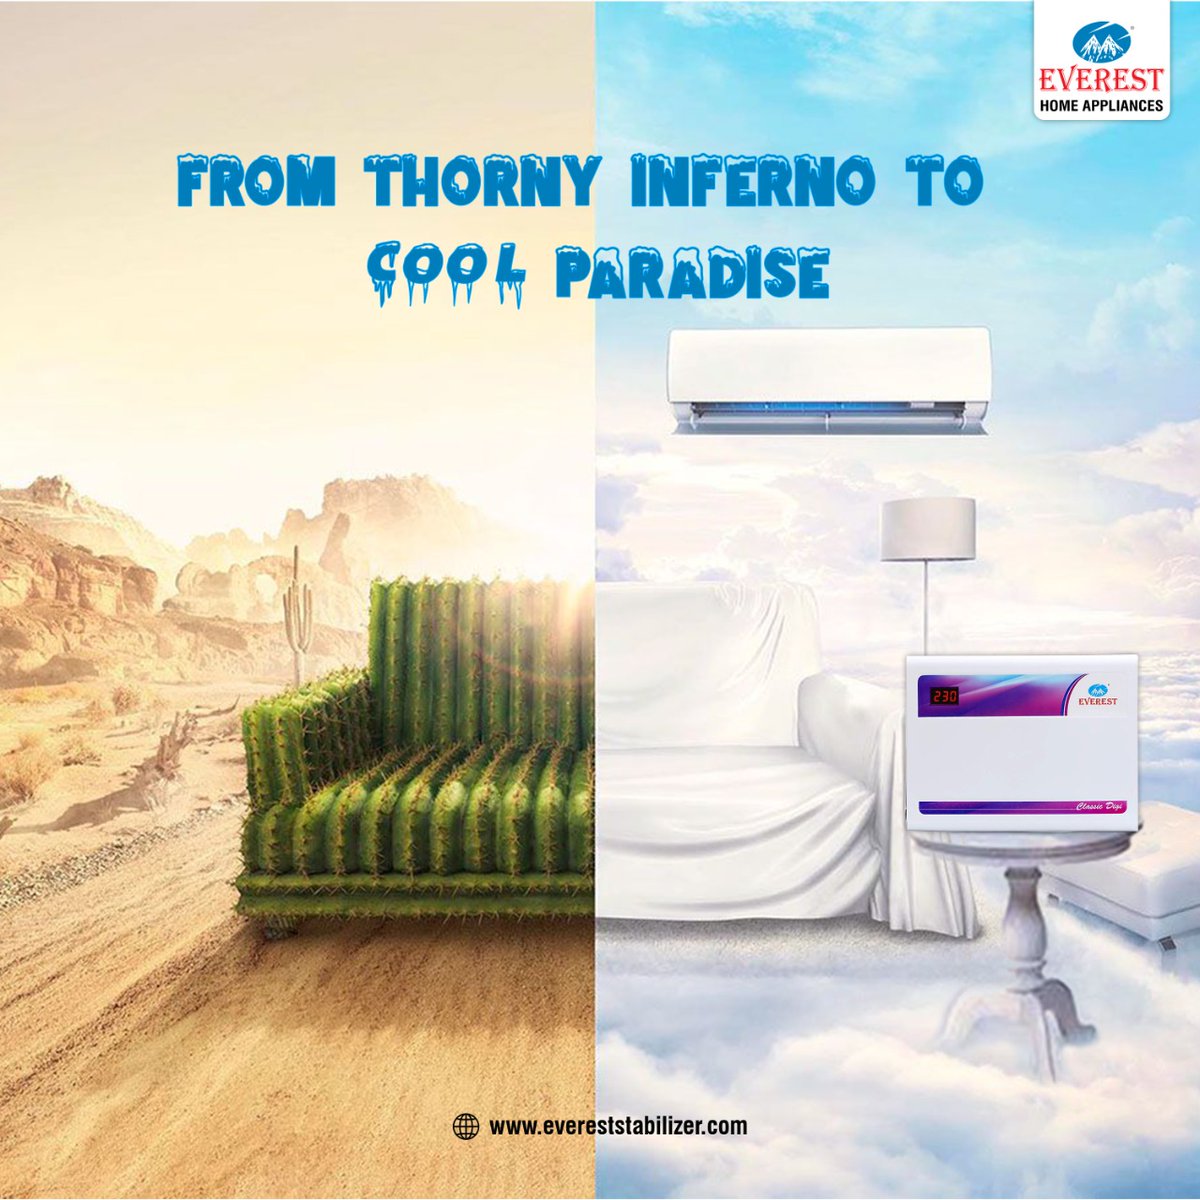 Don't punish yourself this summer. Cool your mind and body without a break. Everest Stabilizers-  wise choice for the optimum functioning of your AC. For reliable and affordable stabilizer,just log on to https://t.co/n3K2pUfJsJ

#evereststabilizers #voltagestabilizer https://t.co/4jBhaZg0Ce